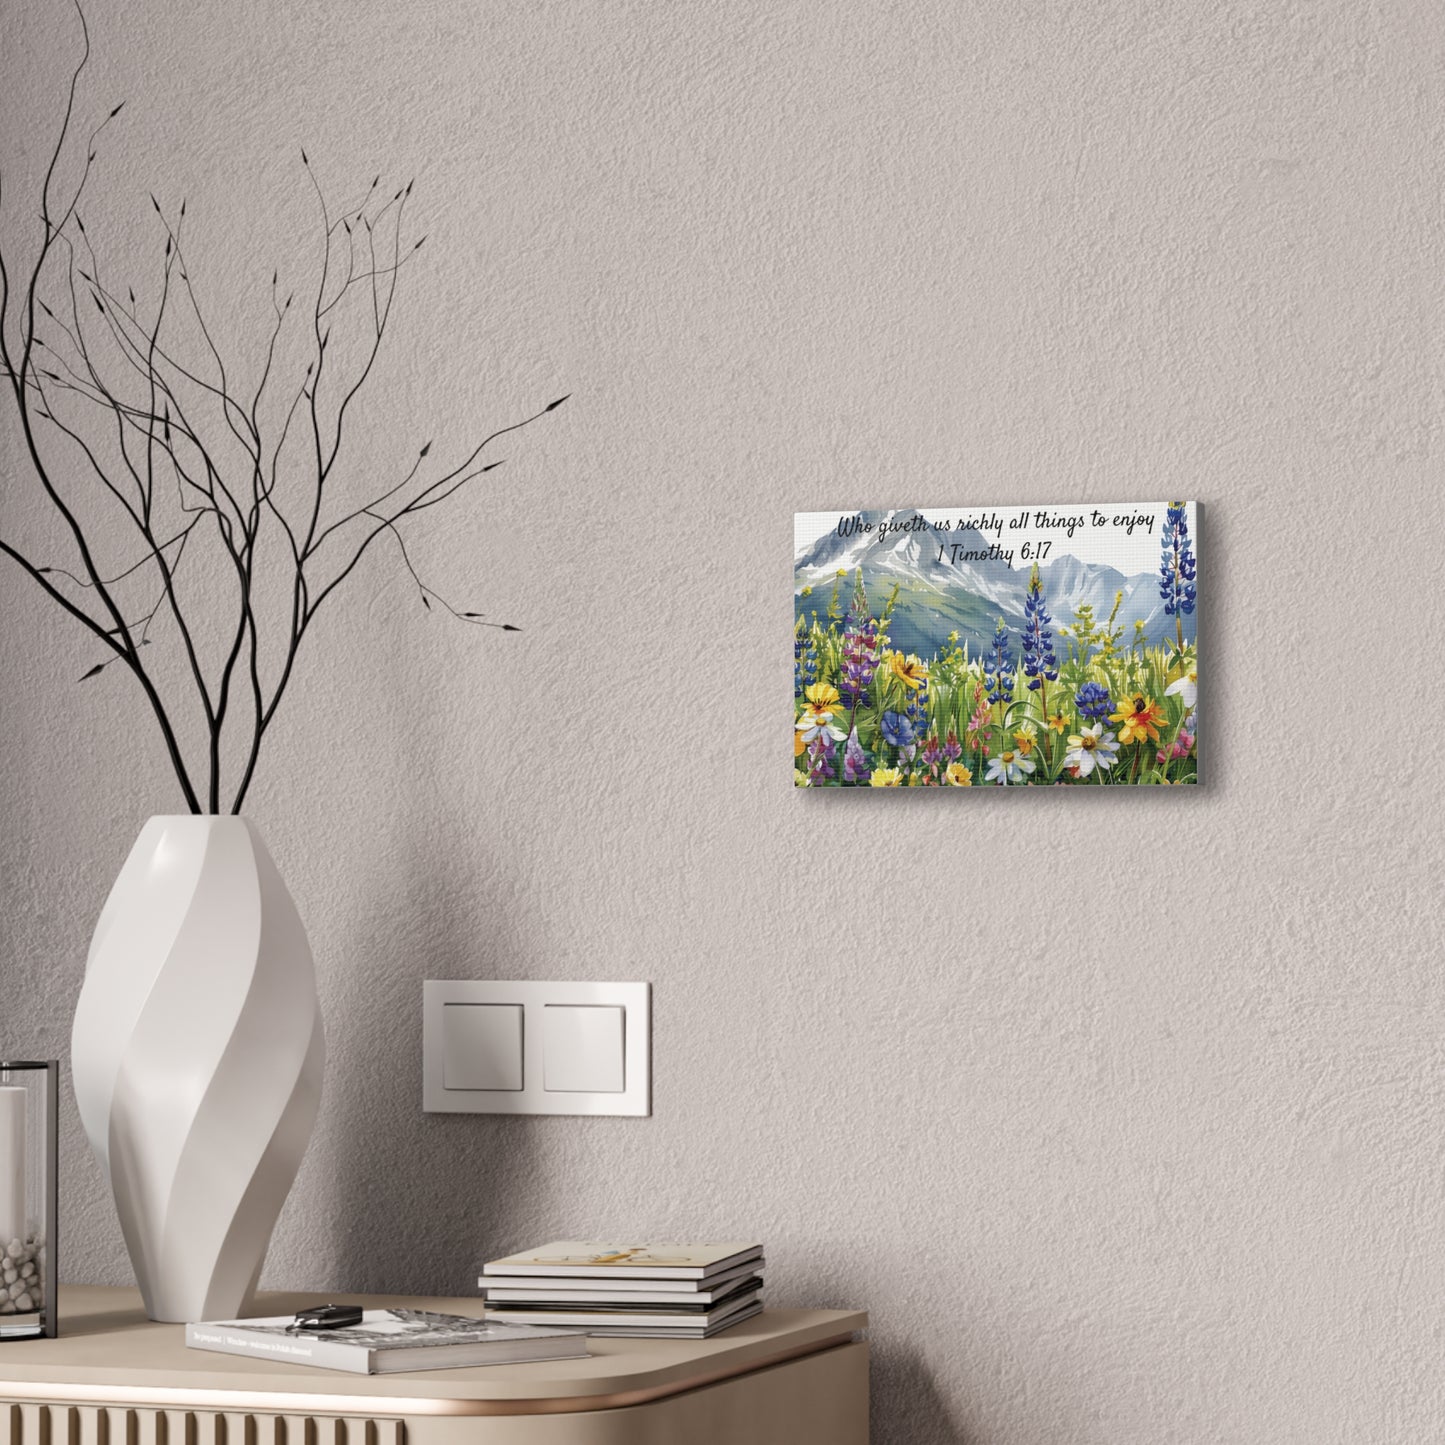 Colorado Alpine Mountain Flower Canvas Print - Stunning Wildflower Art for Your Home - Print #3